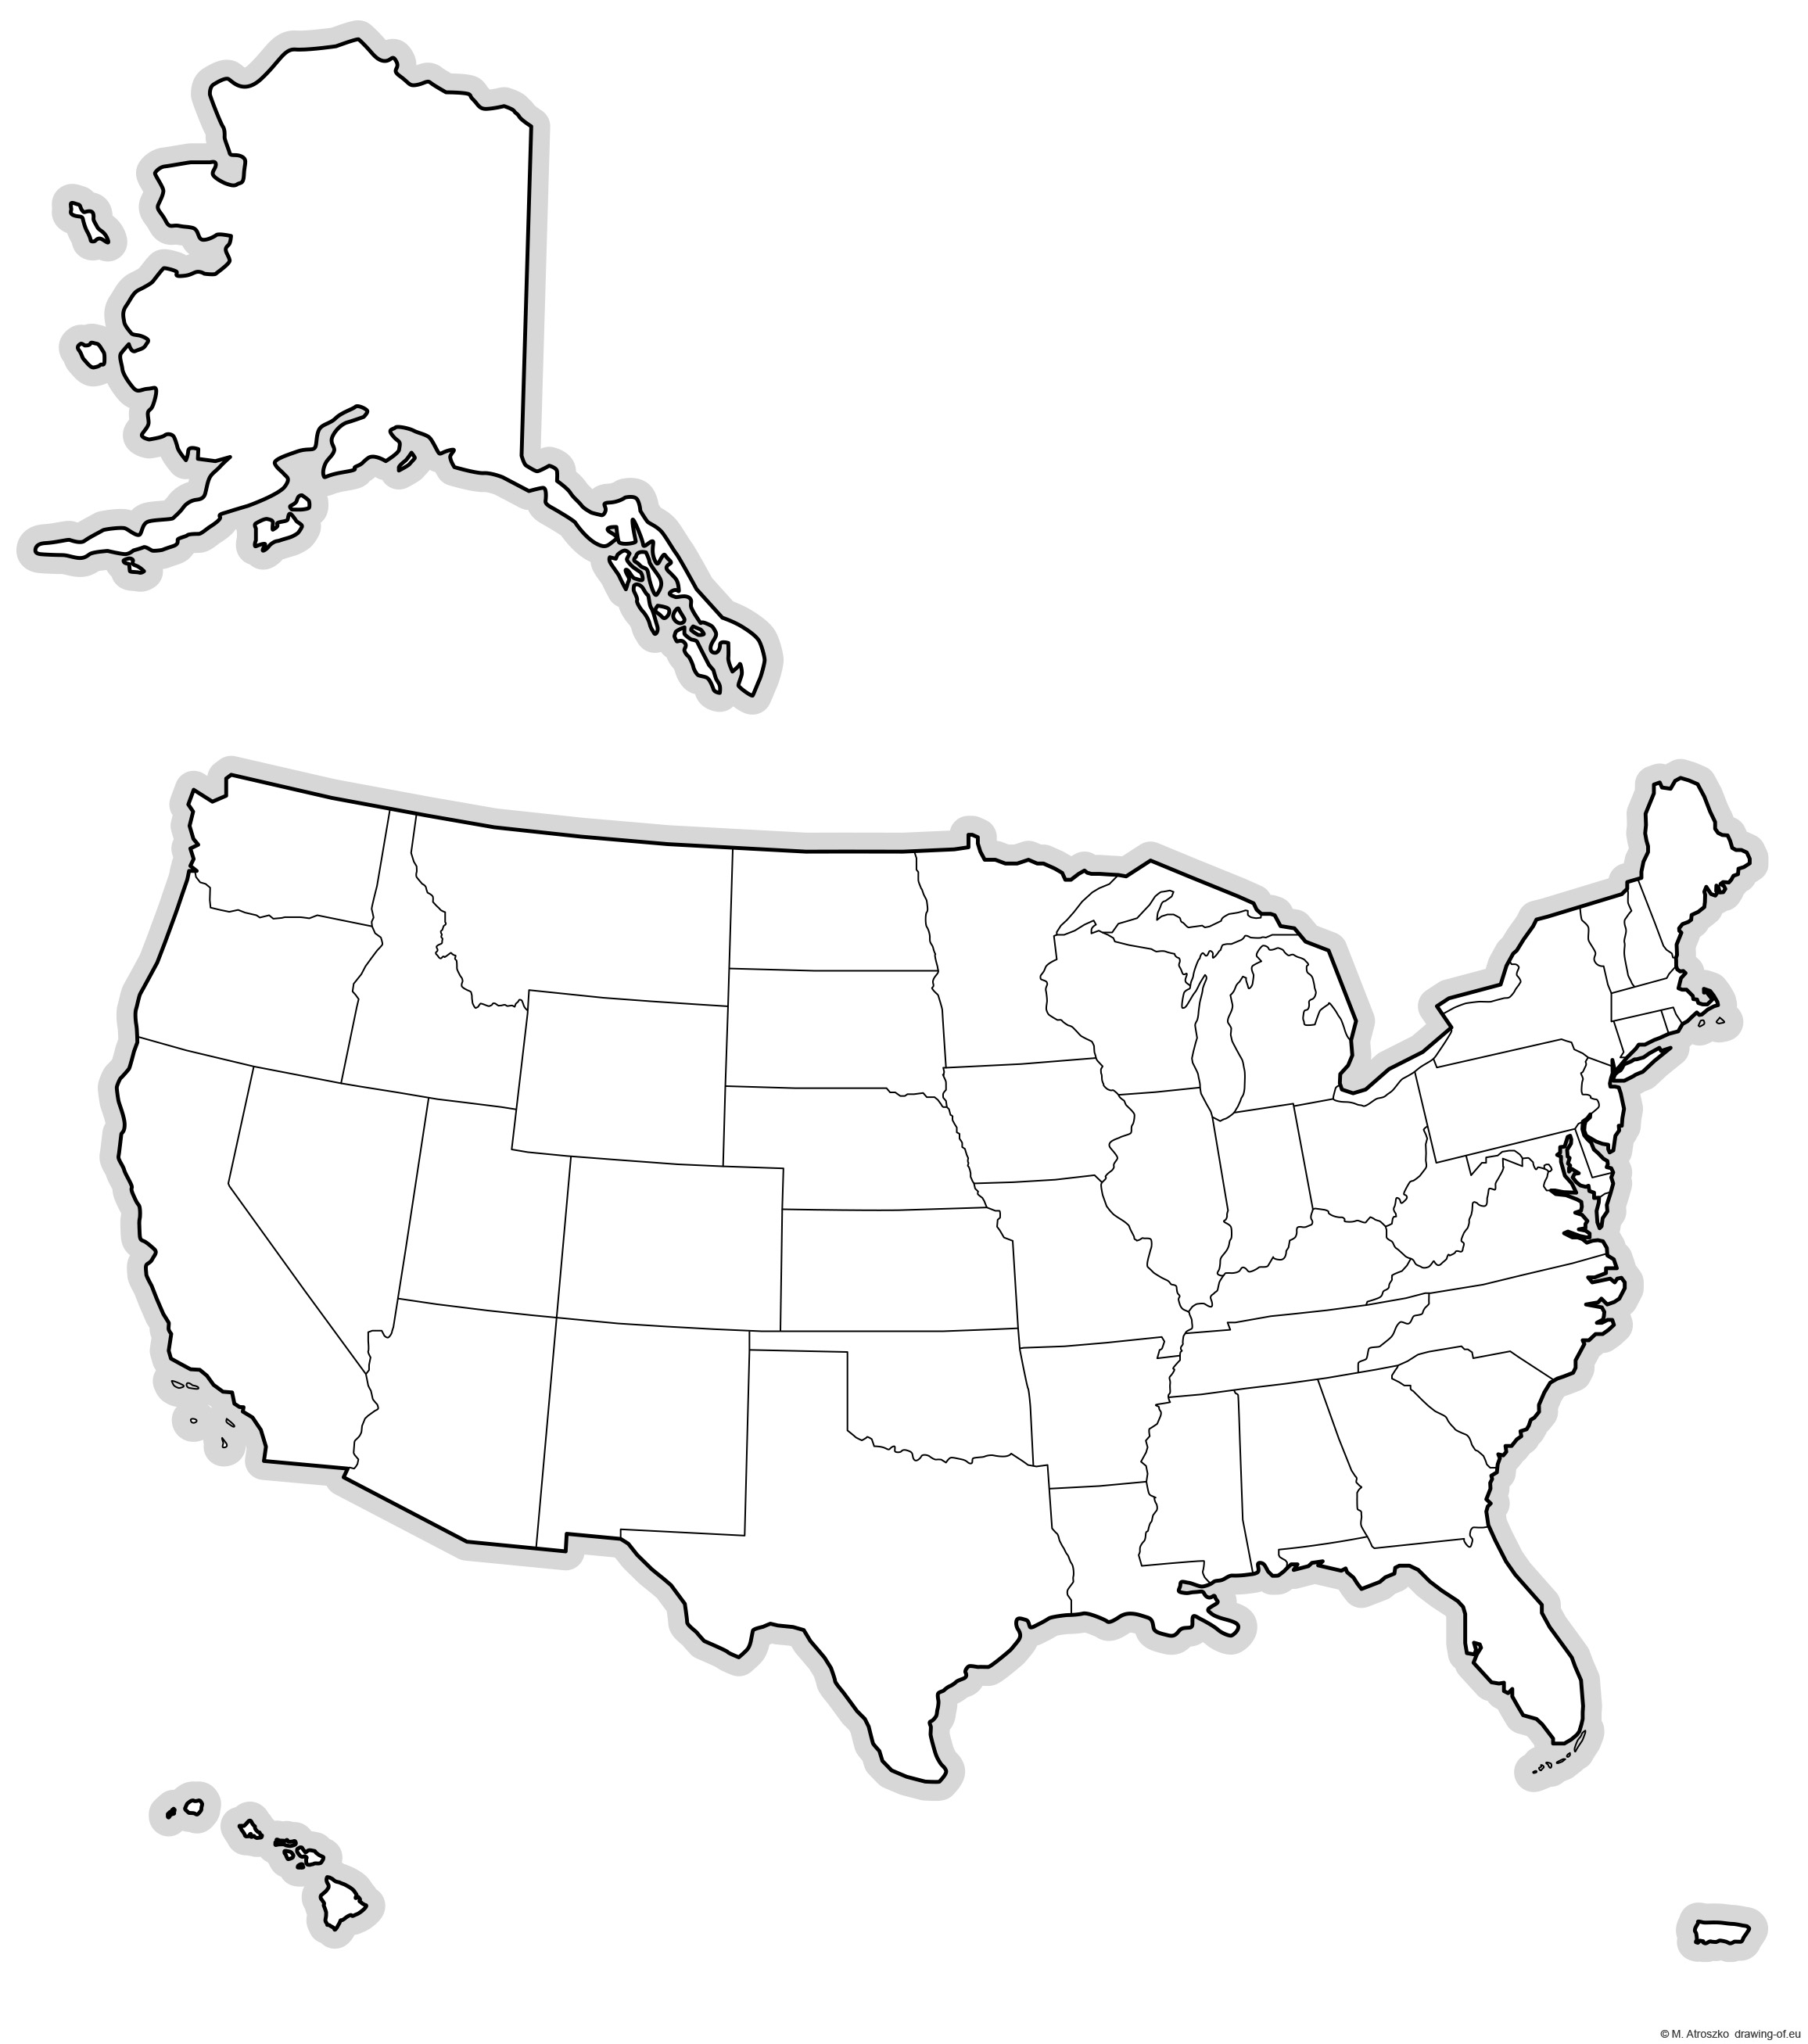 United States map for printing